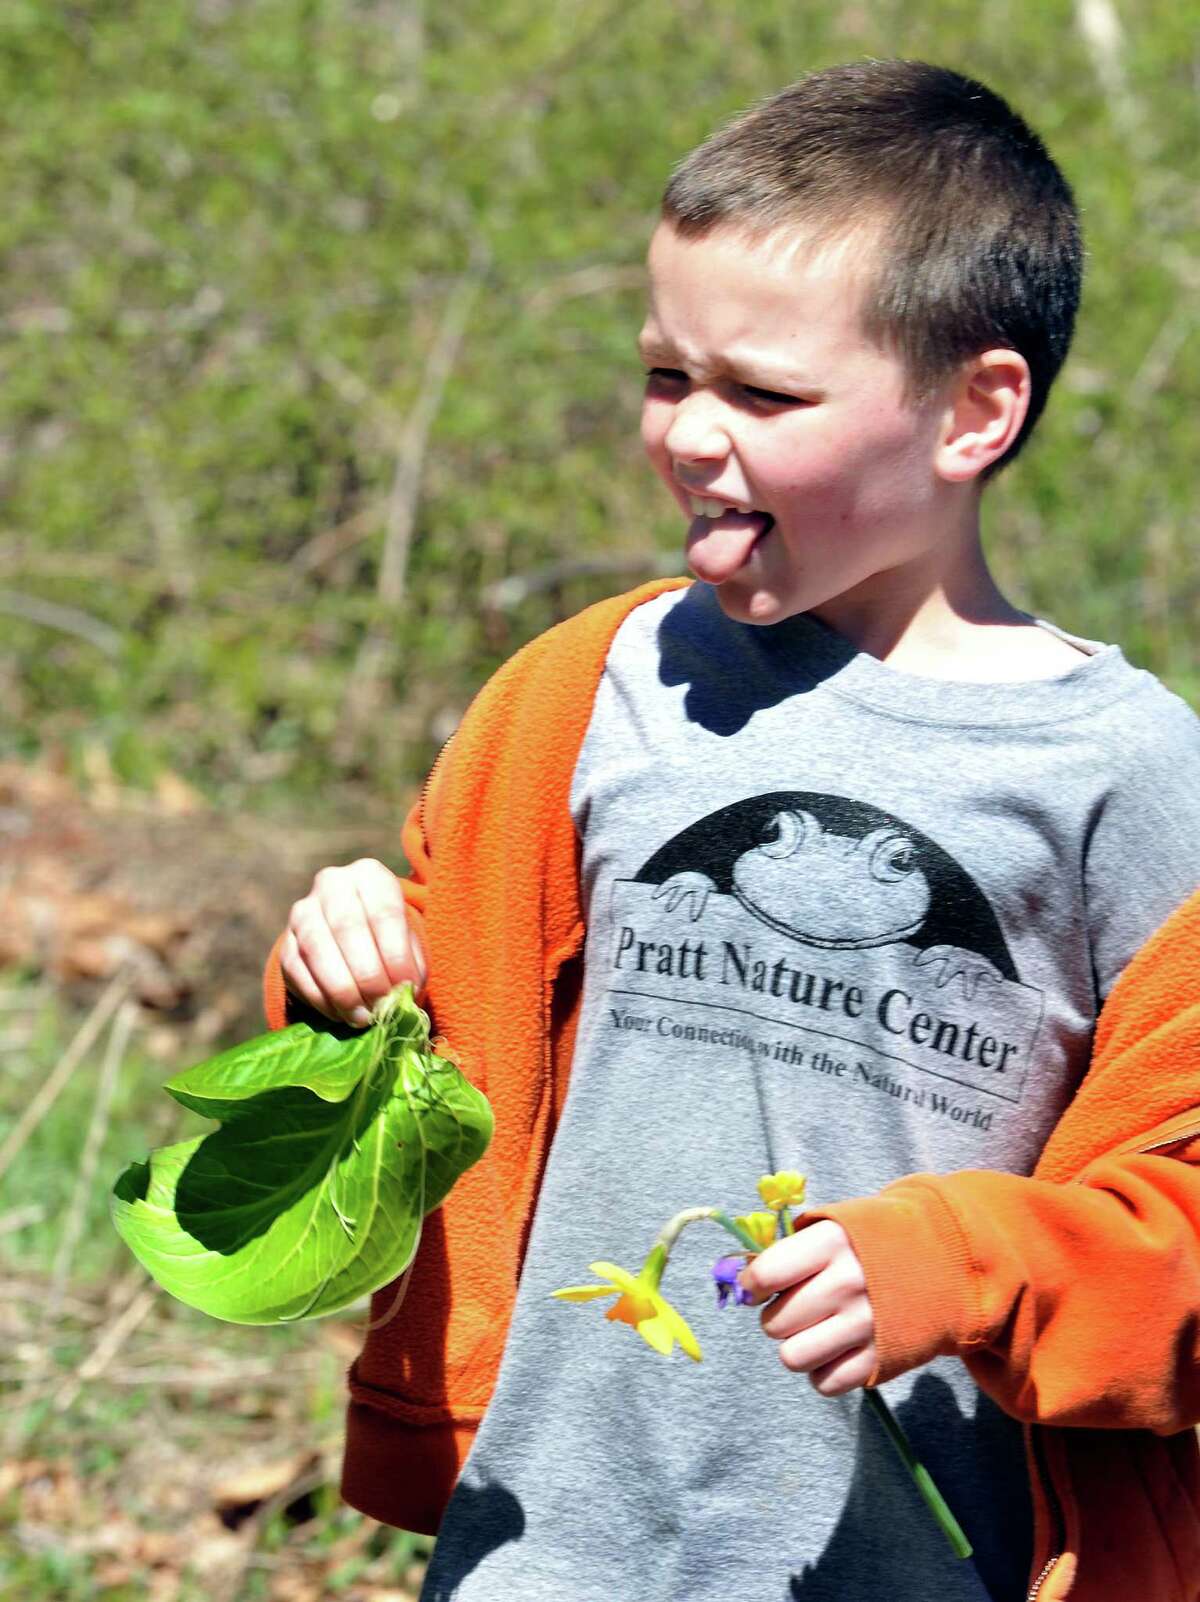 Colin Walsh, 8, reacts after tasting skunk cabbage during Vacation Camp at the Pratt Nature Center in New Milford Friday, April 6, 2012.